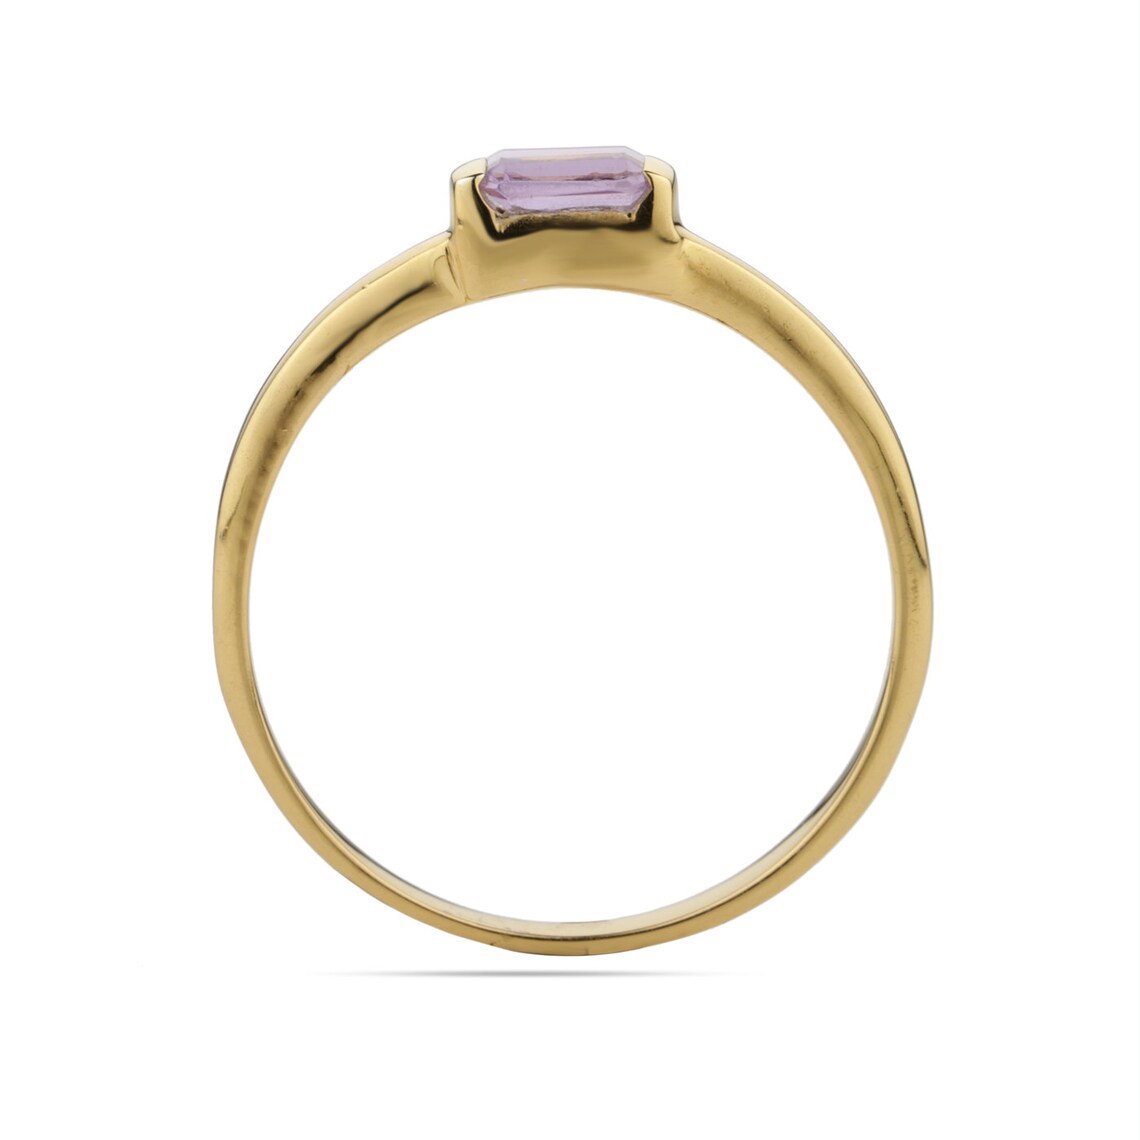 18K Gold Plated - Sterling 925 Silver Amethyst Ring, Natural Amethyst February Gemstone, Handmade Vermeil Gold Stacking Ring, Dainty Minimalist Women's Gifting Jewelry